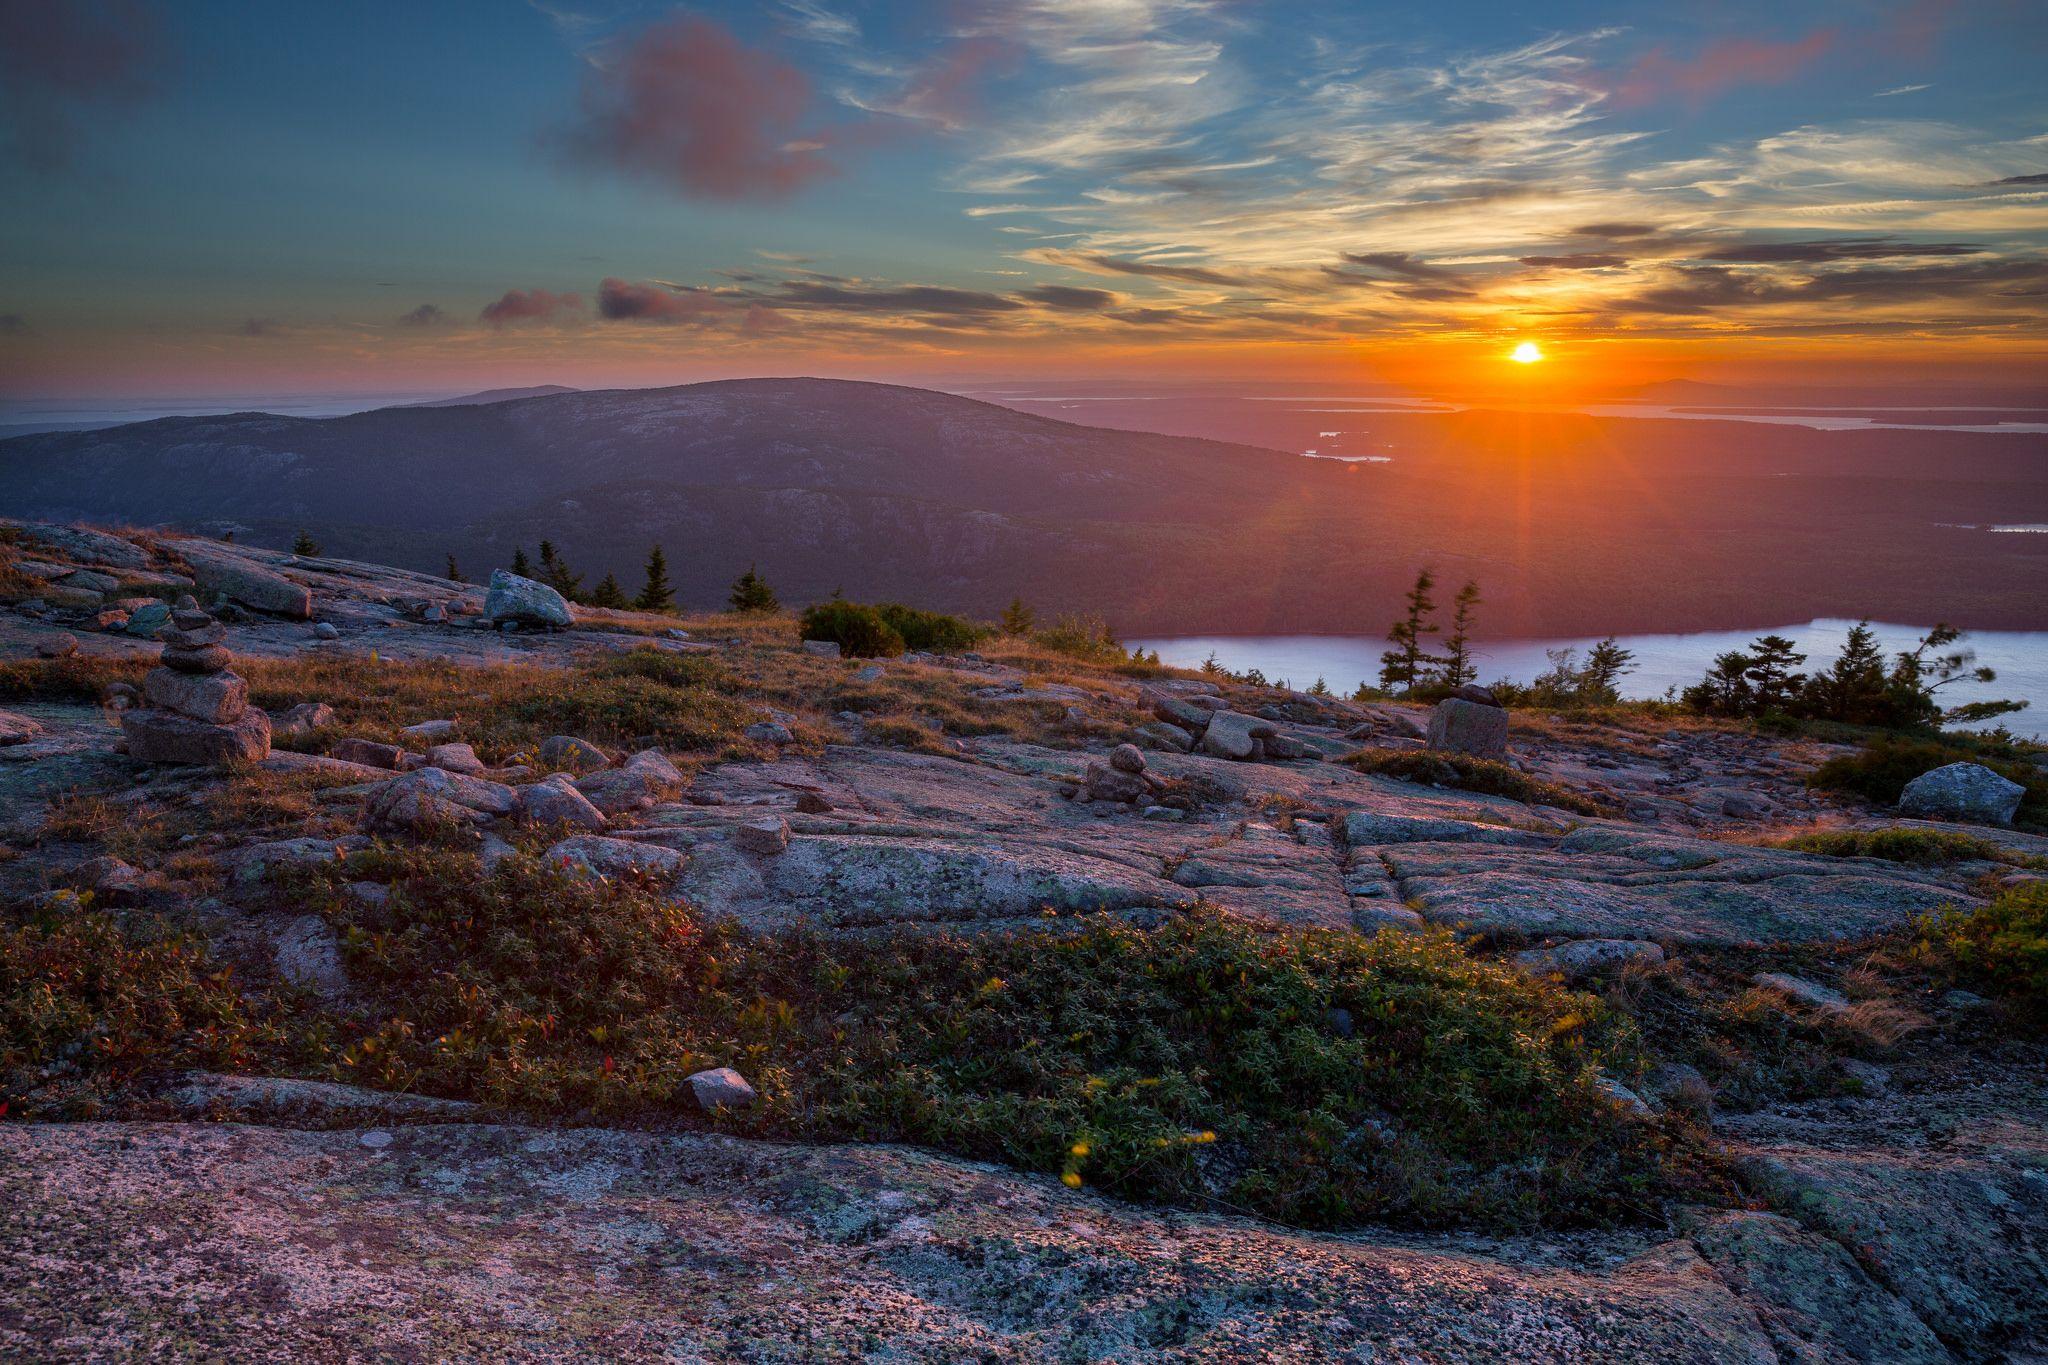 Acadia National Park: 20 Stunning Photo of The Rugged Northeast